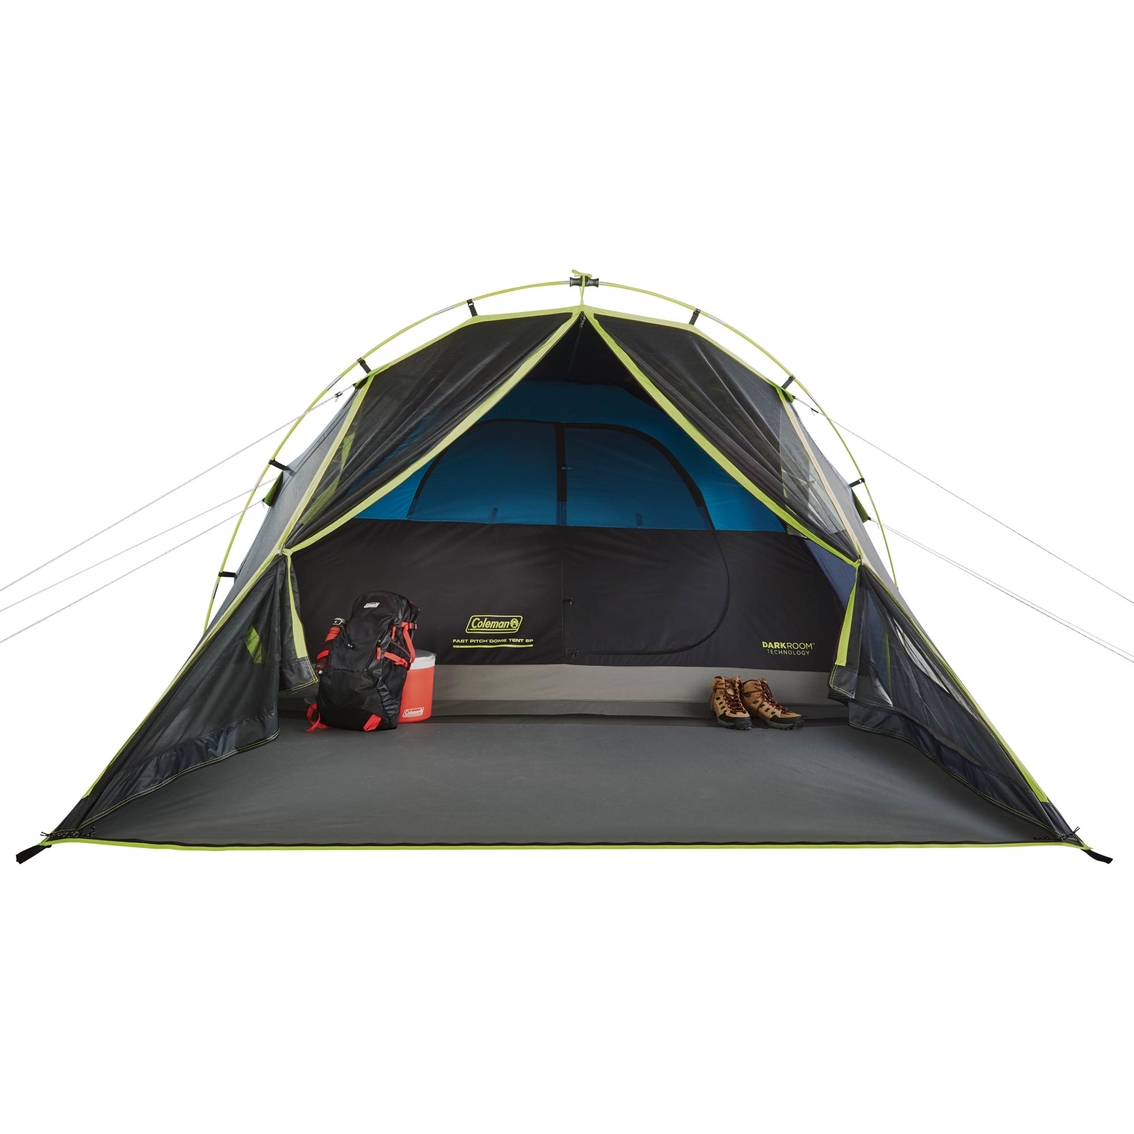 Coleman Carlsbad Fast Pitch 6 Person Dome Tent with Screen Room - Image 2 of 6